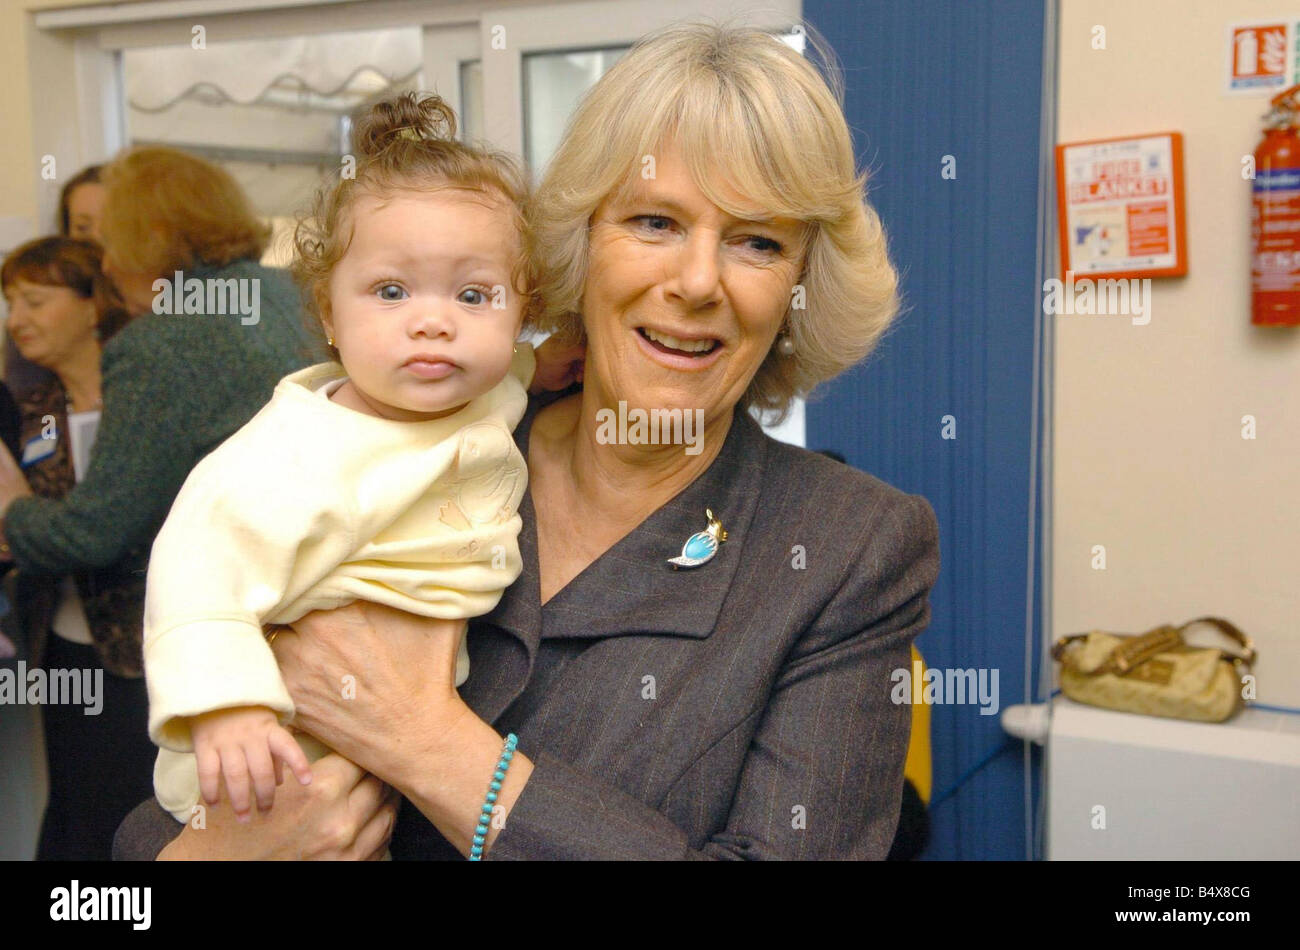 The Duchess of Cornwall during her visit to the charity GFS Platform s home for teenage mothers in Bromley south east London The unit is a supported housing scheme with bedrooms for six girls aged between 16 and 20 who are pregnant or have children and are homeless The Duchess of Cornwall with 5 month old Renee Mason during her visit November 2006 Stock Photo